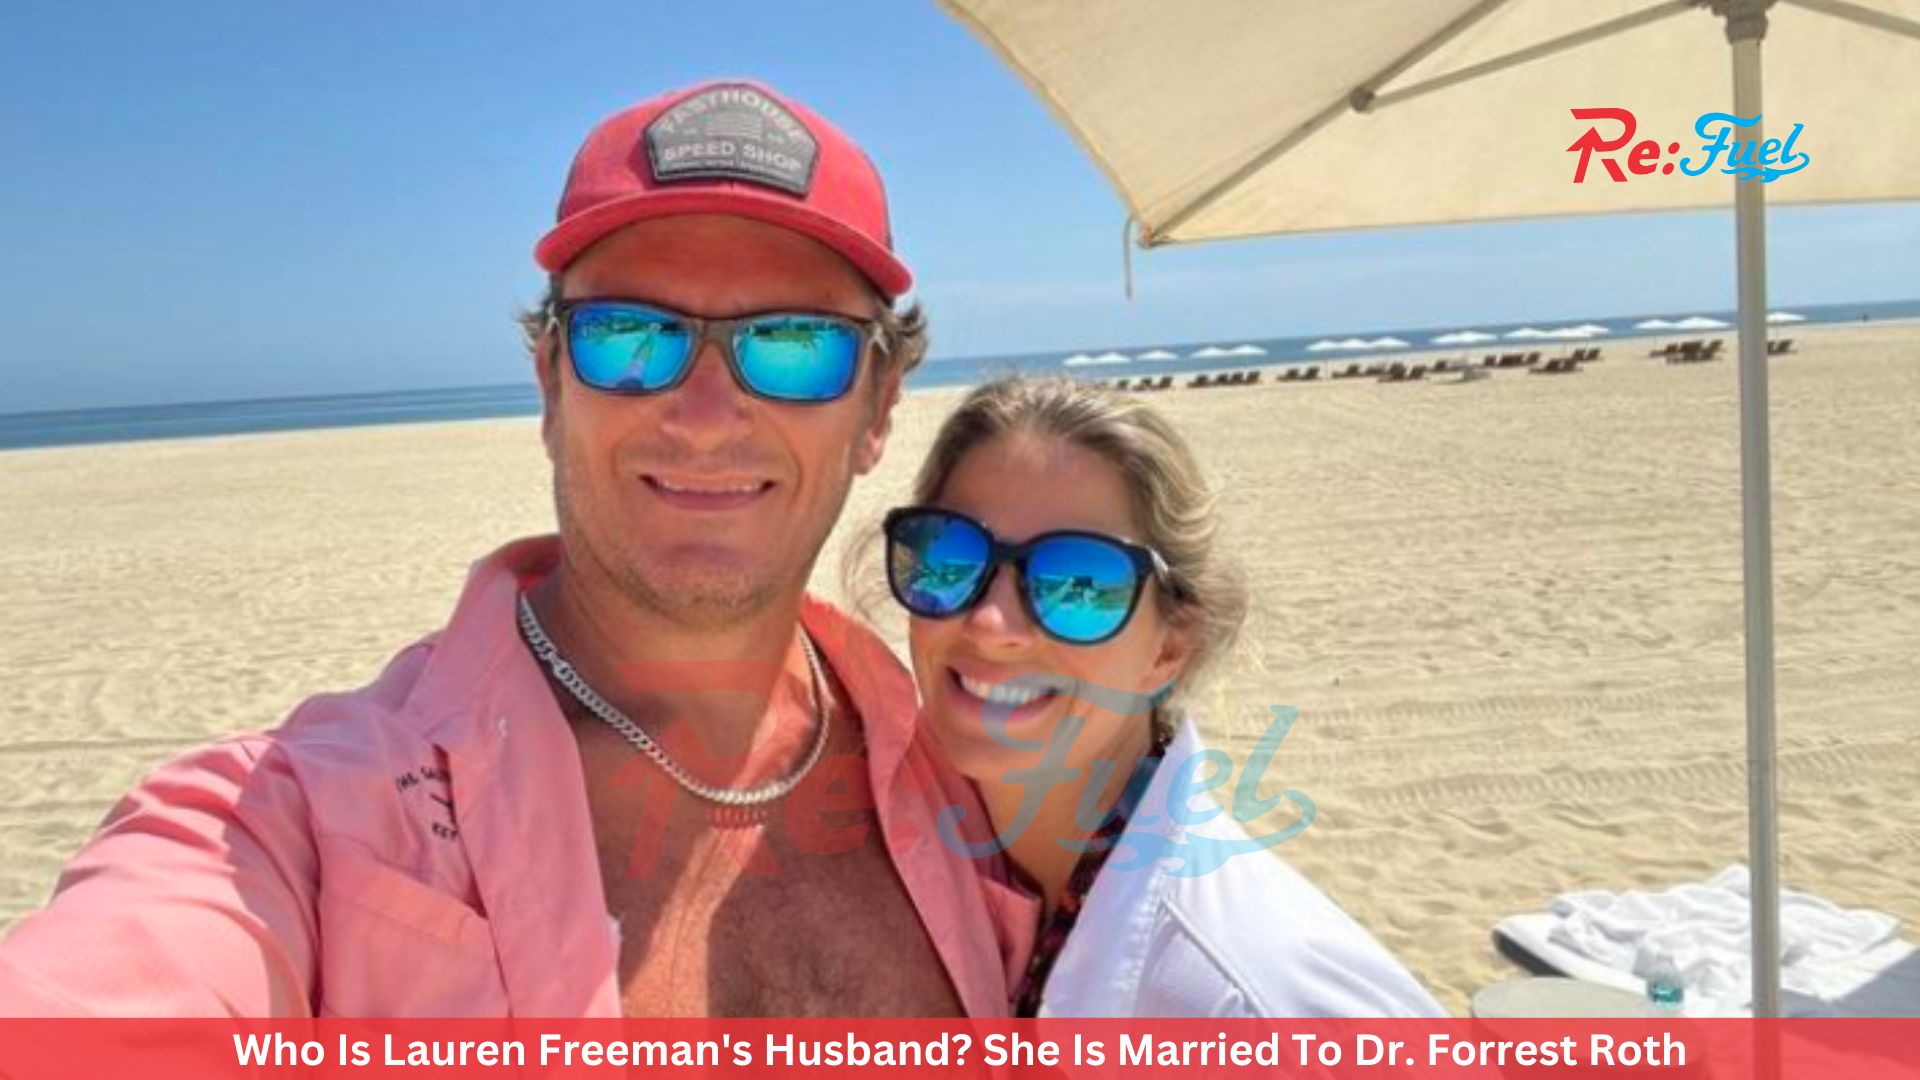 Who Is Lauren Freeman's Husband? She Is Married To Dr. Forrest Roth